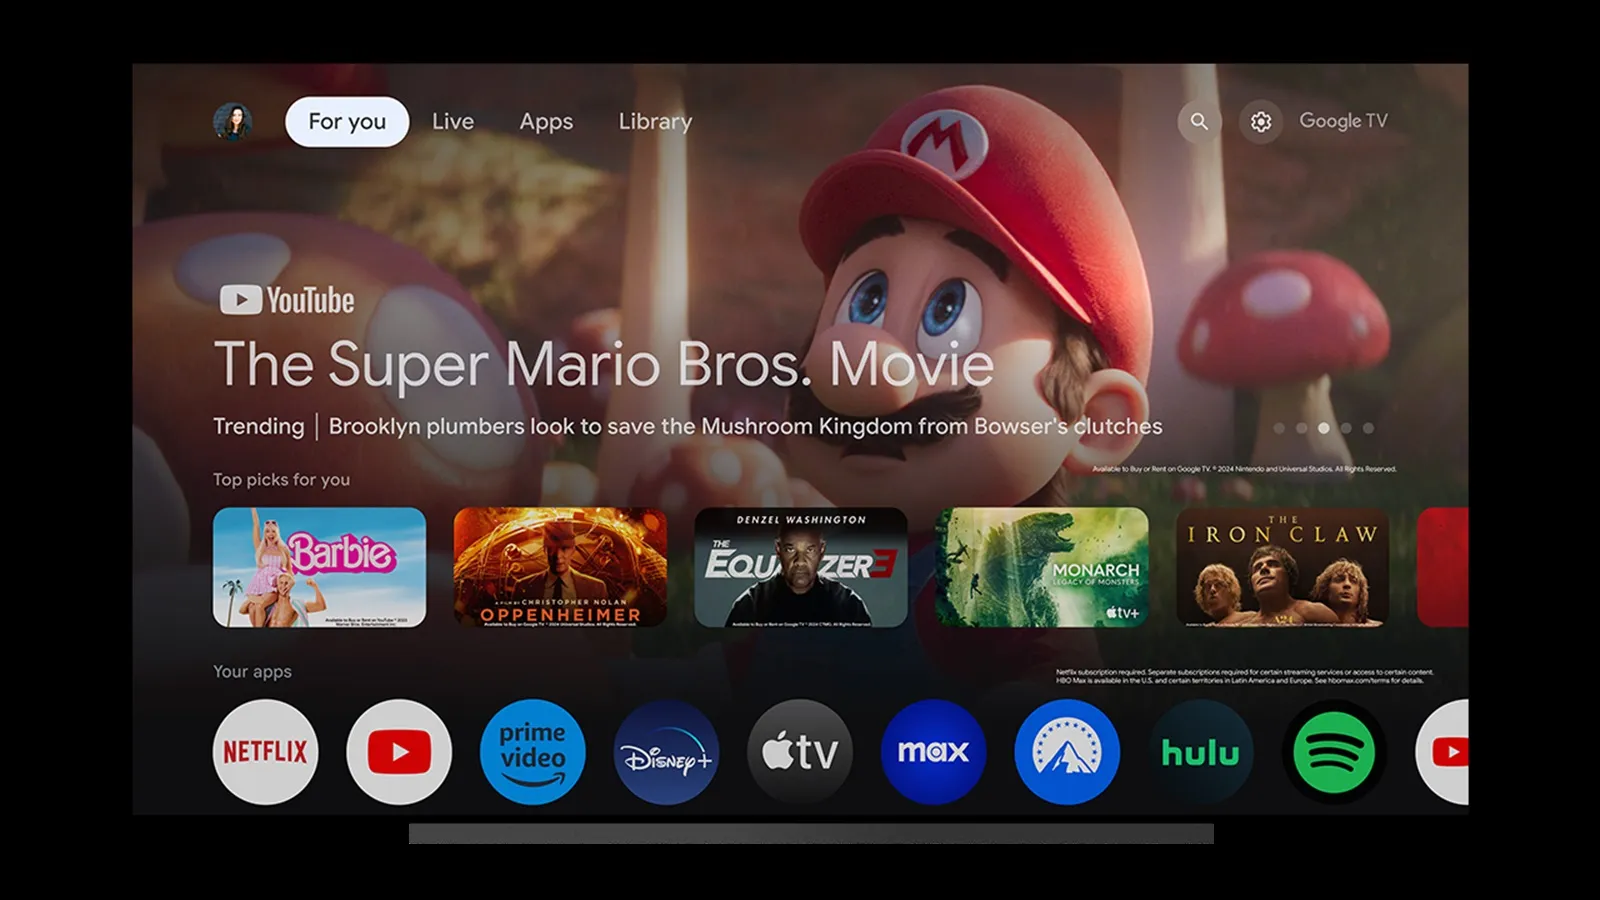 Google TV update declutters home screen with circular icons in 'Your apps'  row